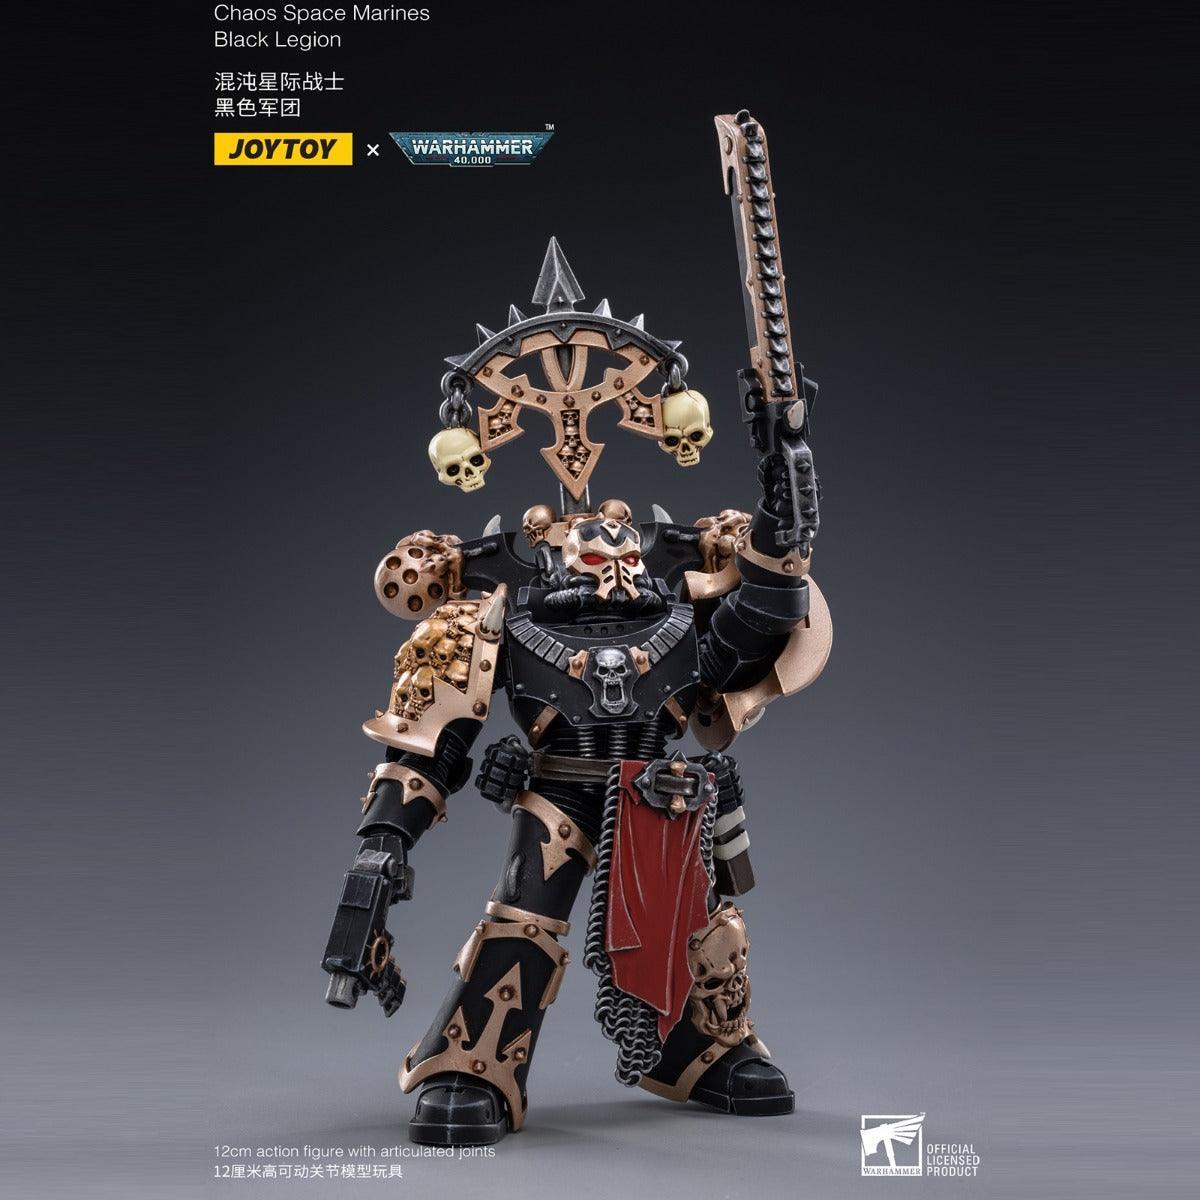 Chaos Space Marines Old painted figure Warhammer 40k Pre-Sale